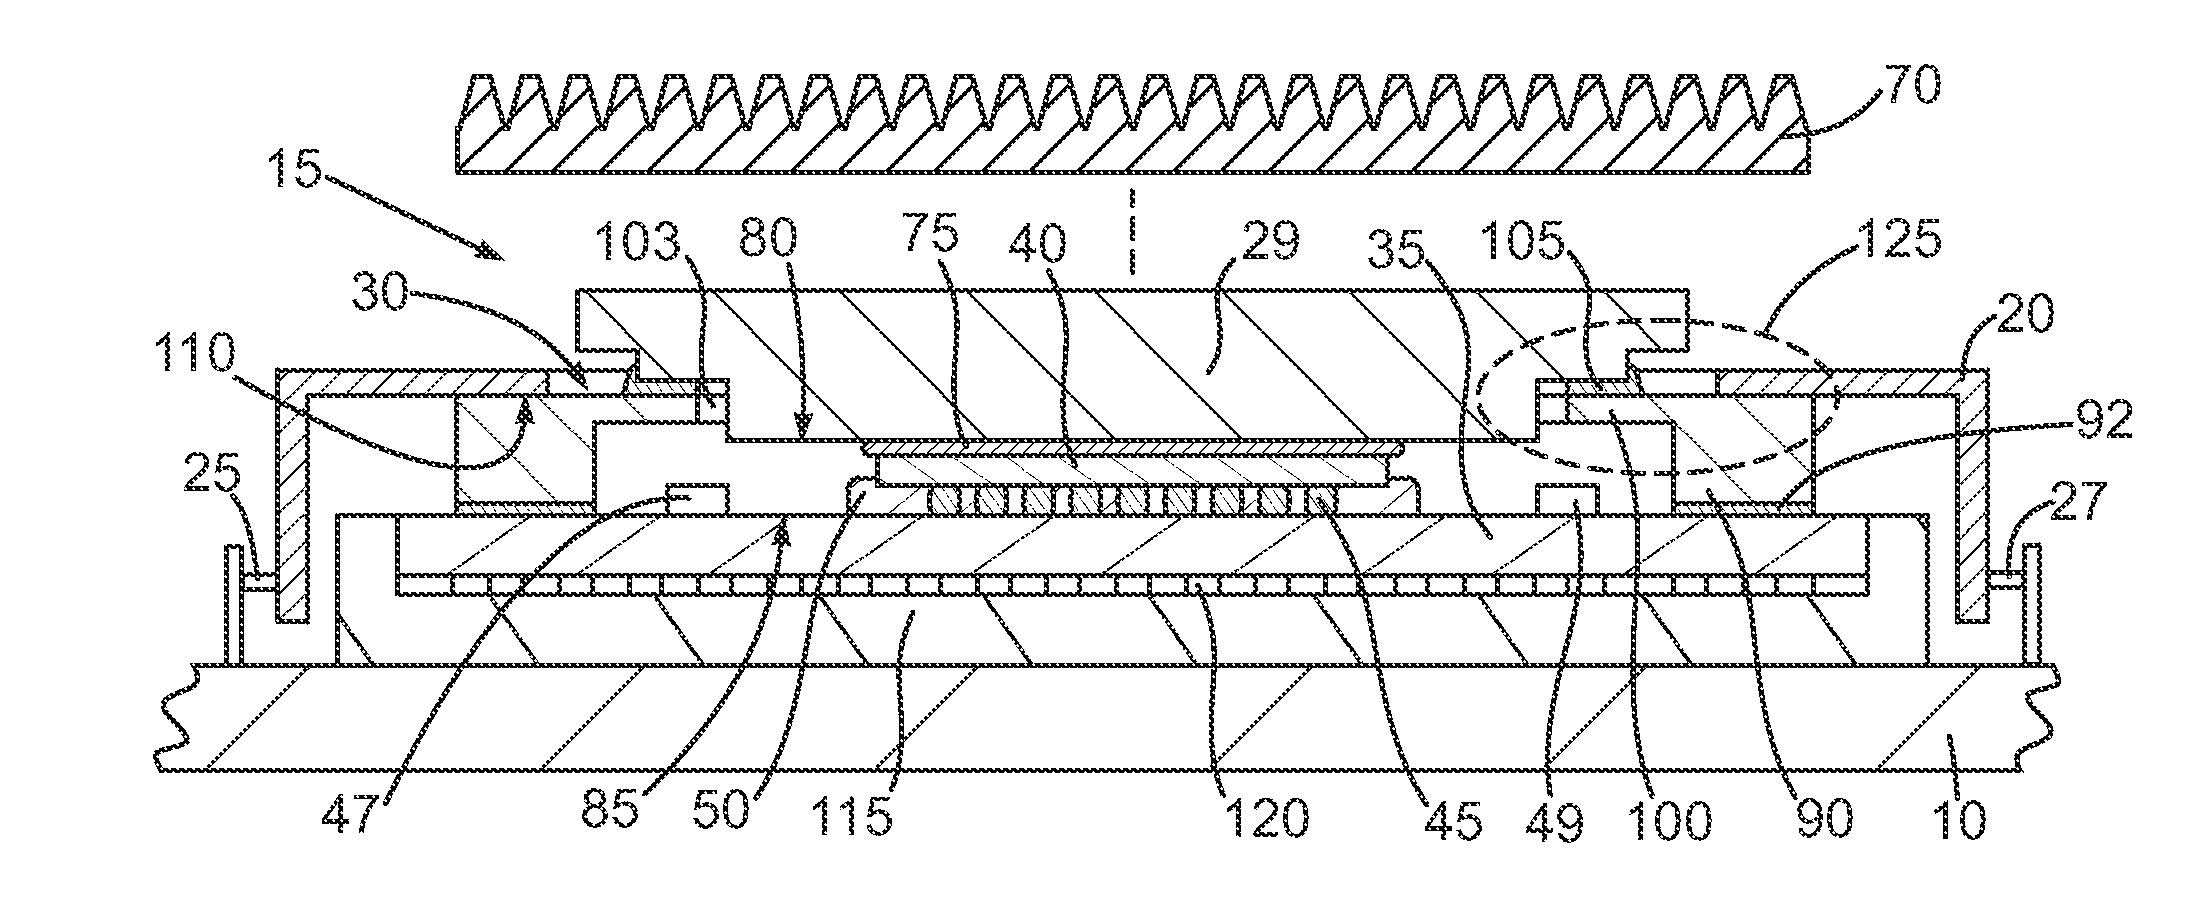 Semiconductor Chip Package with Stiffener Frame and Configured Lid